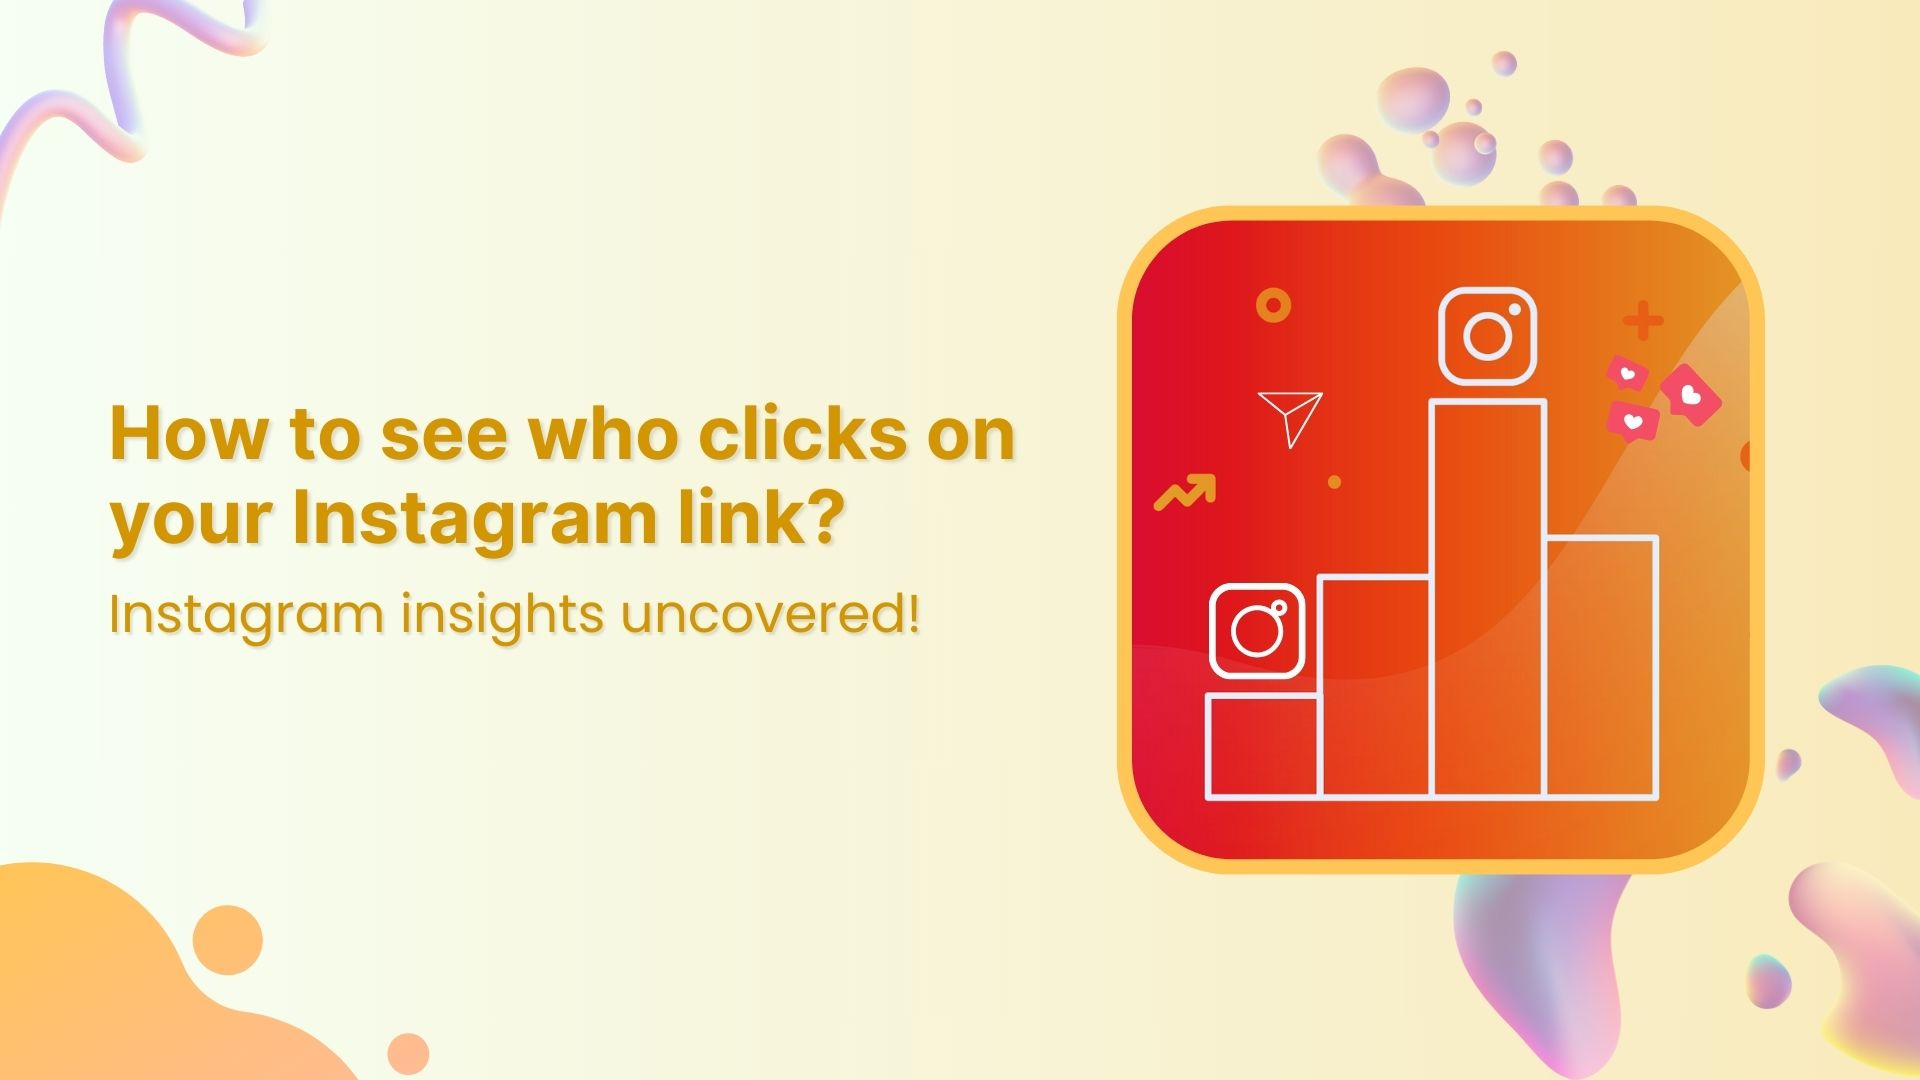 How to see who clicks on your Instagram link?